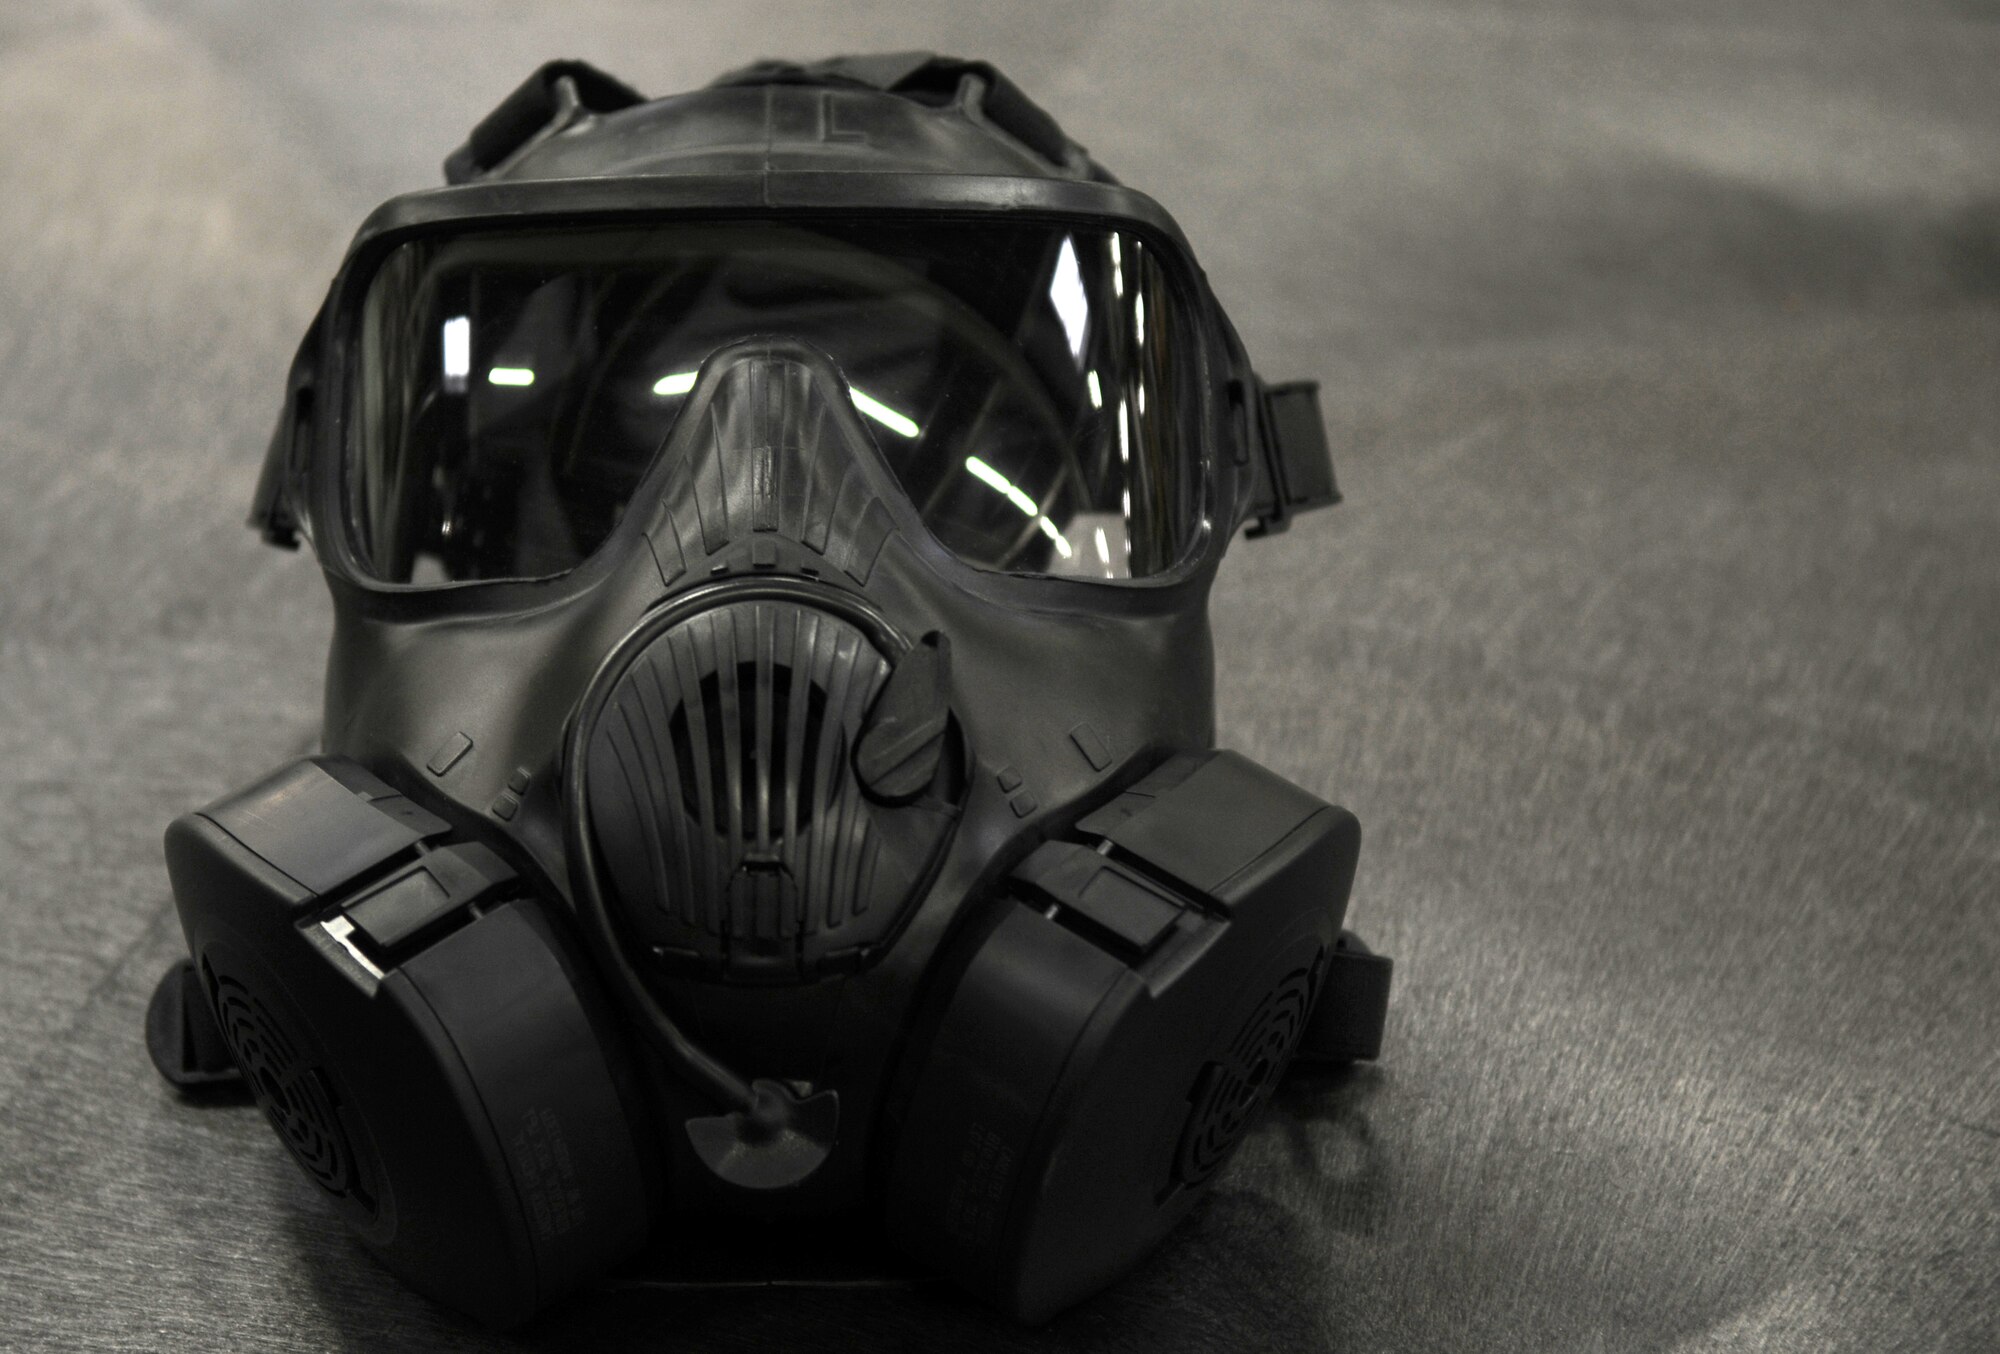 The new M50 protective mask will be replacing the MCU-2P protective mask,Ramstein Air Base, Germany, November 11, 2009.  (U.S. Air Force photo by Staff Sgt. Charity Barrett)